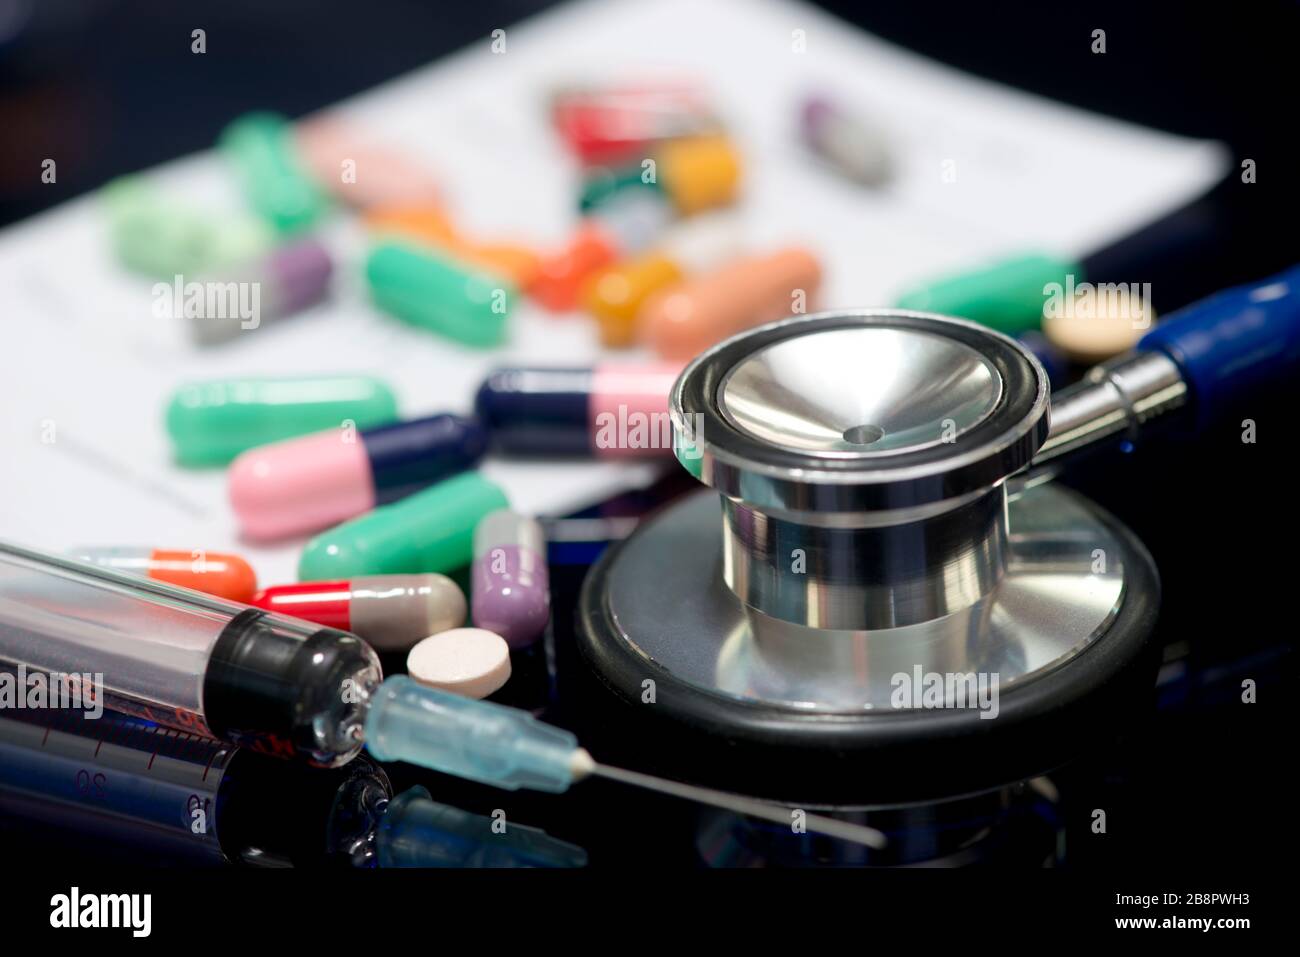 Stethoscope, syringe, different colored medications, and written doctor's prescription on dark reflective surface. Stock Photo